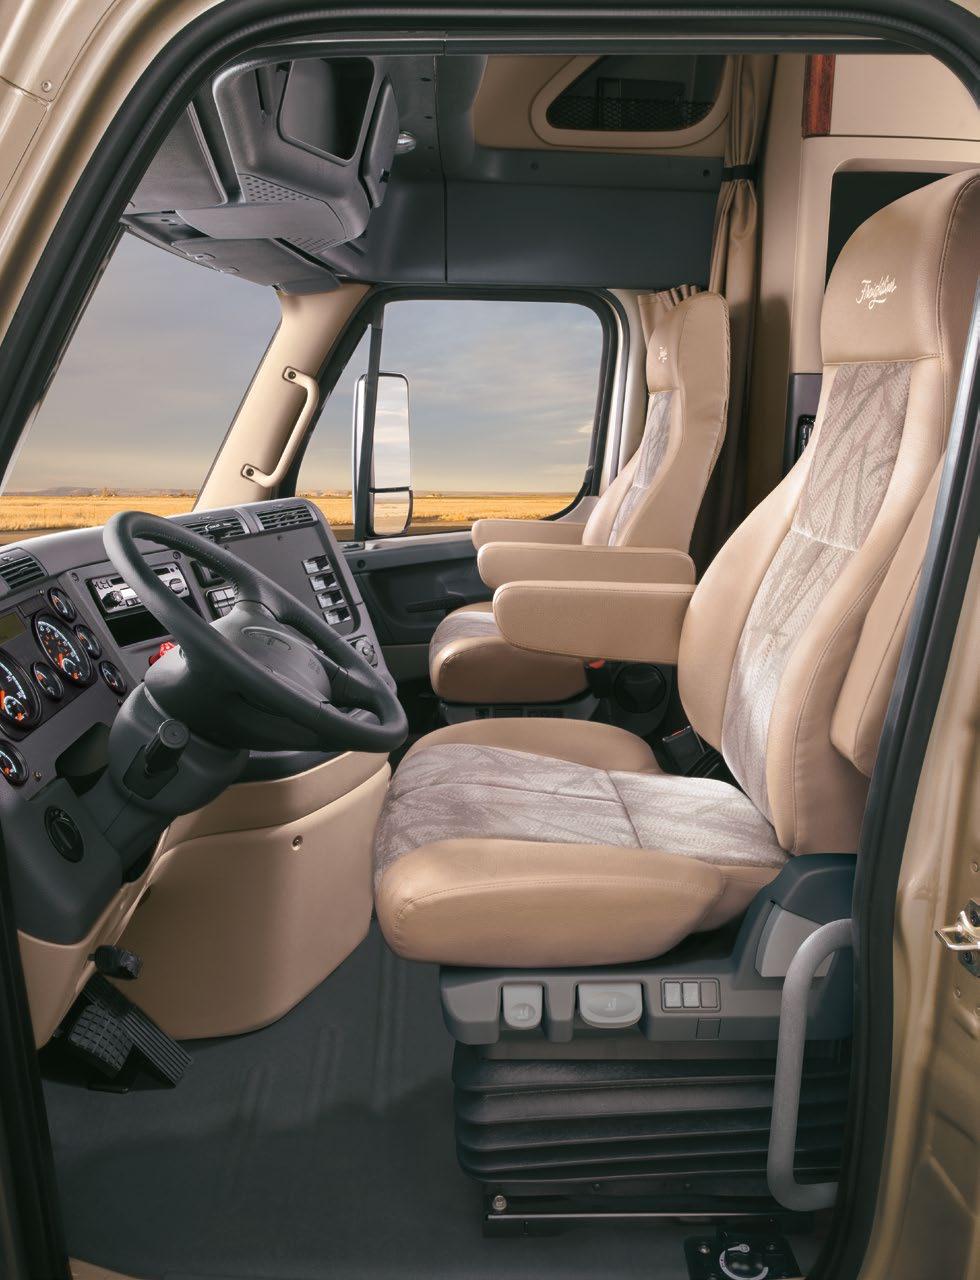 And with two feet of flat space between the seats, drivers and passengers can move about freely, without obstruction. Roominess is just the beginning.